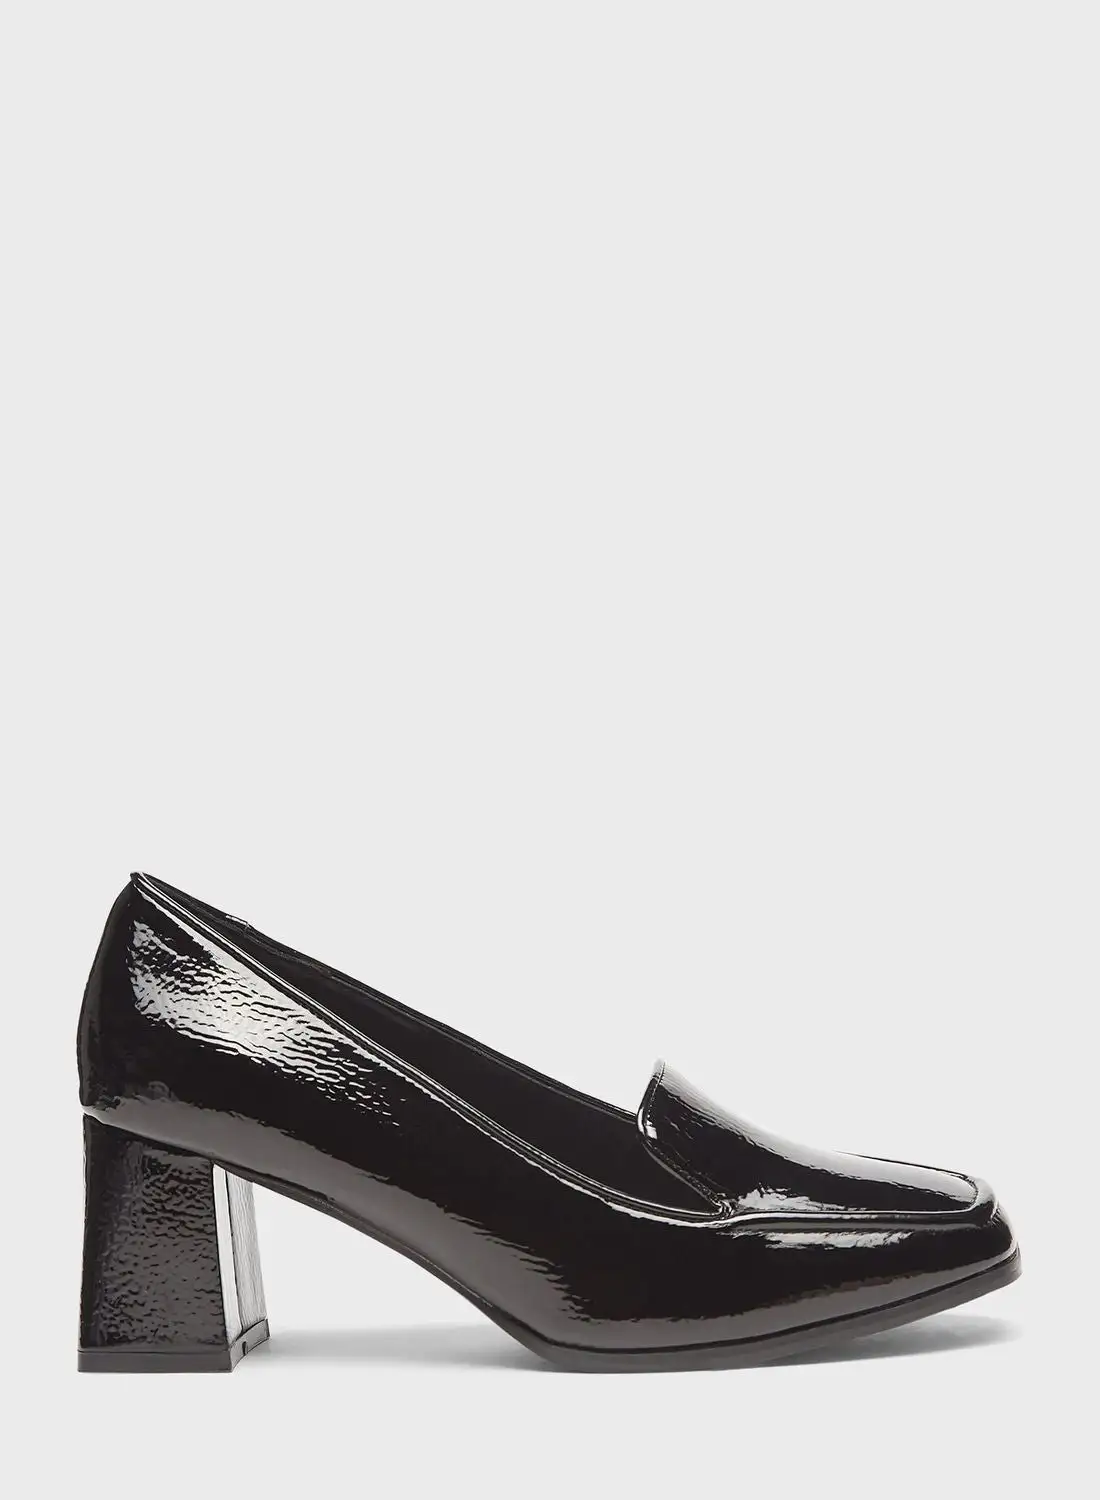 shoexpress Pointed Toe Pumps